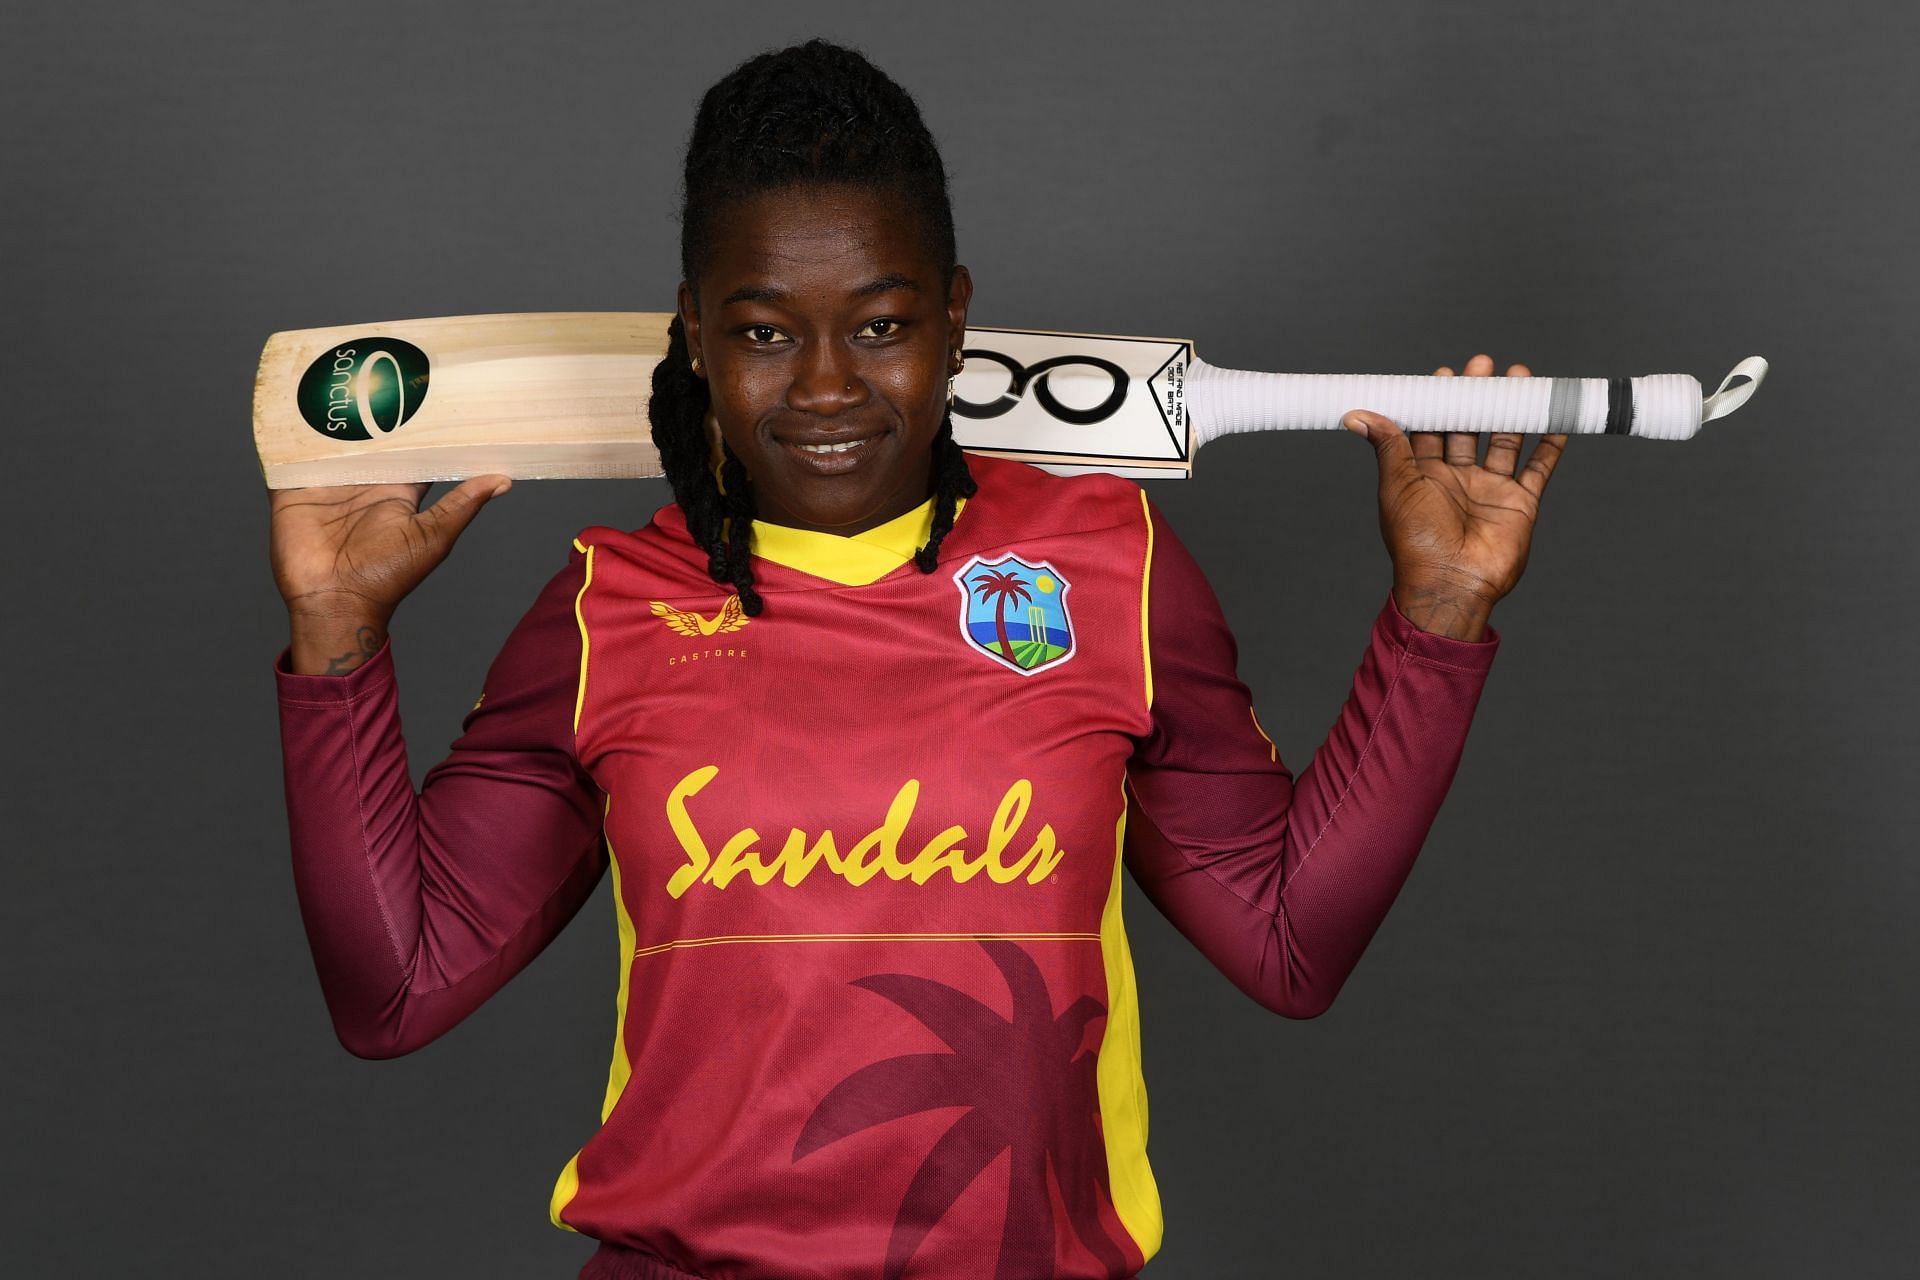 On her day, Deandra Dottin is perhaps one of the most dangerous all-rounders in the game.